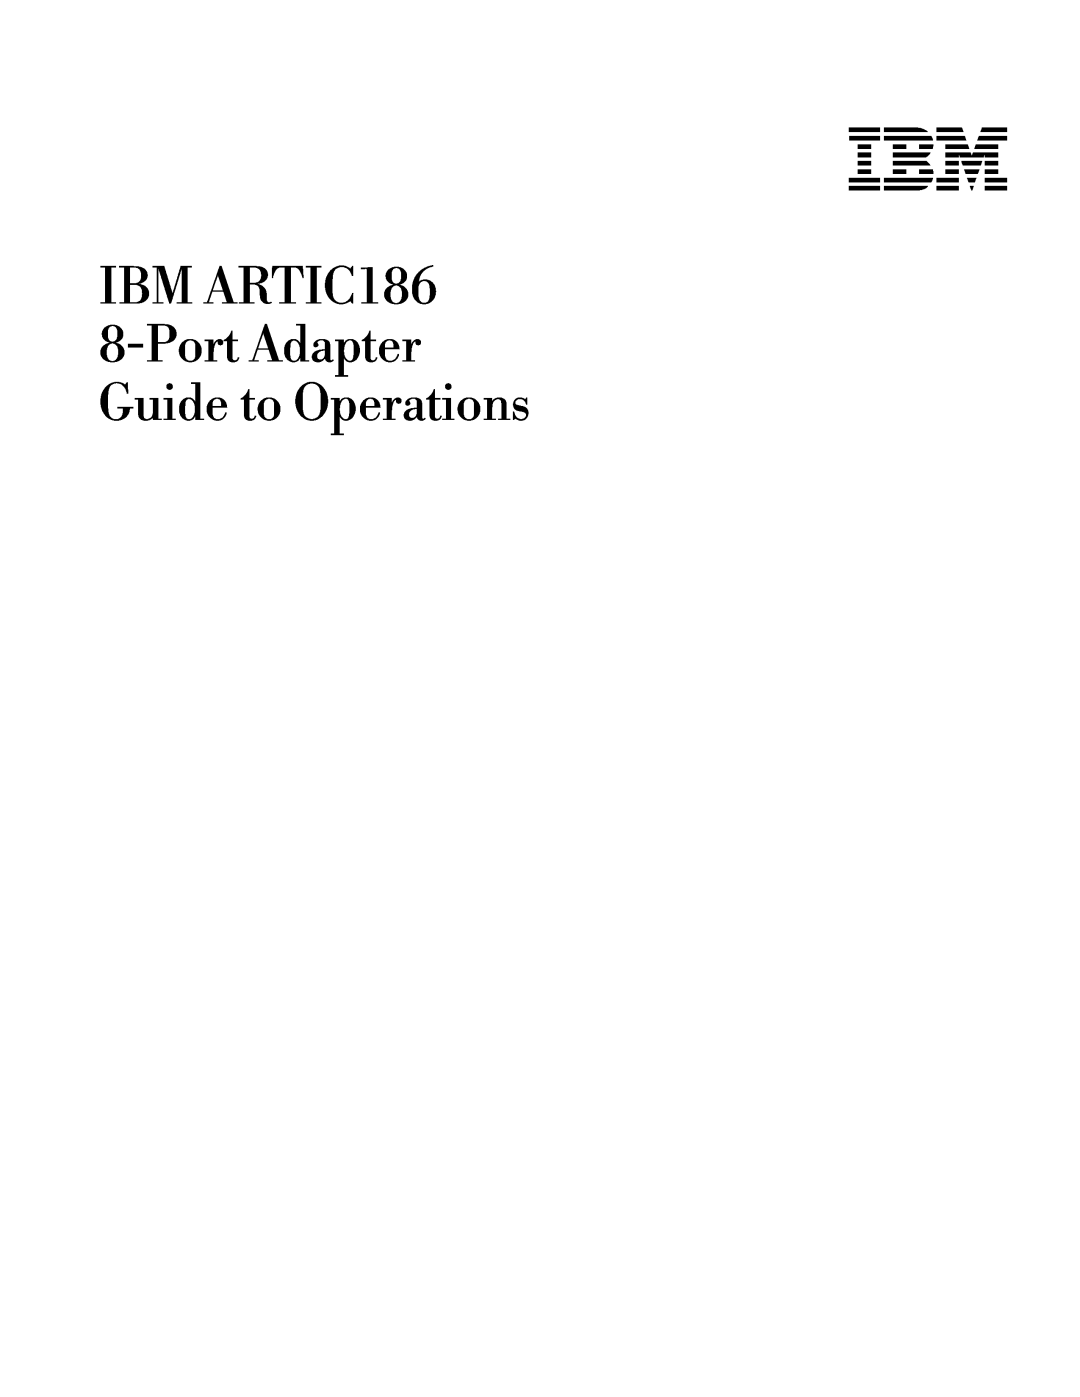 IBM manual IBM ARTIC186 8-Port Adapter Guide to Operations 